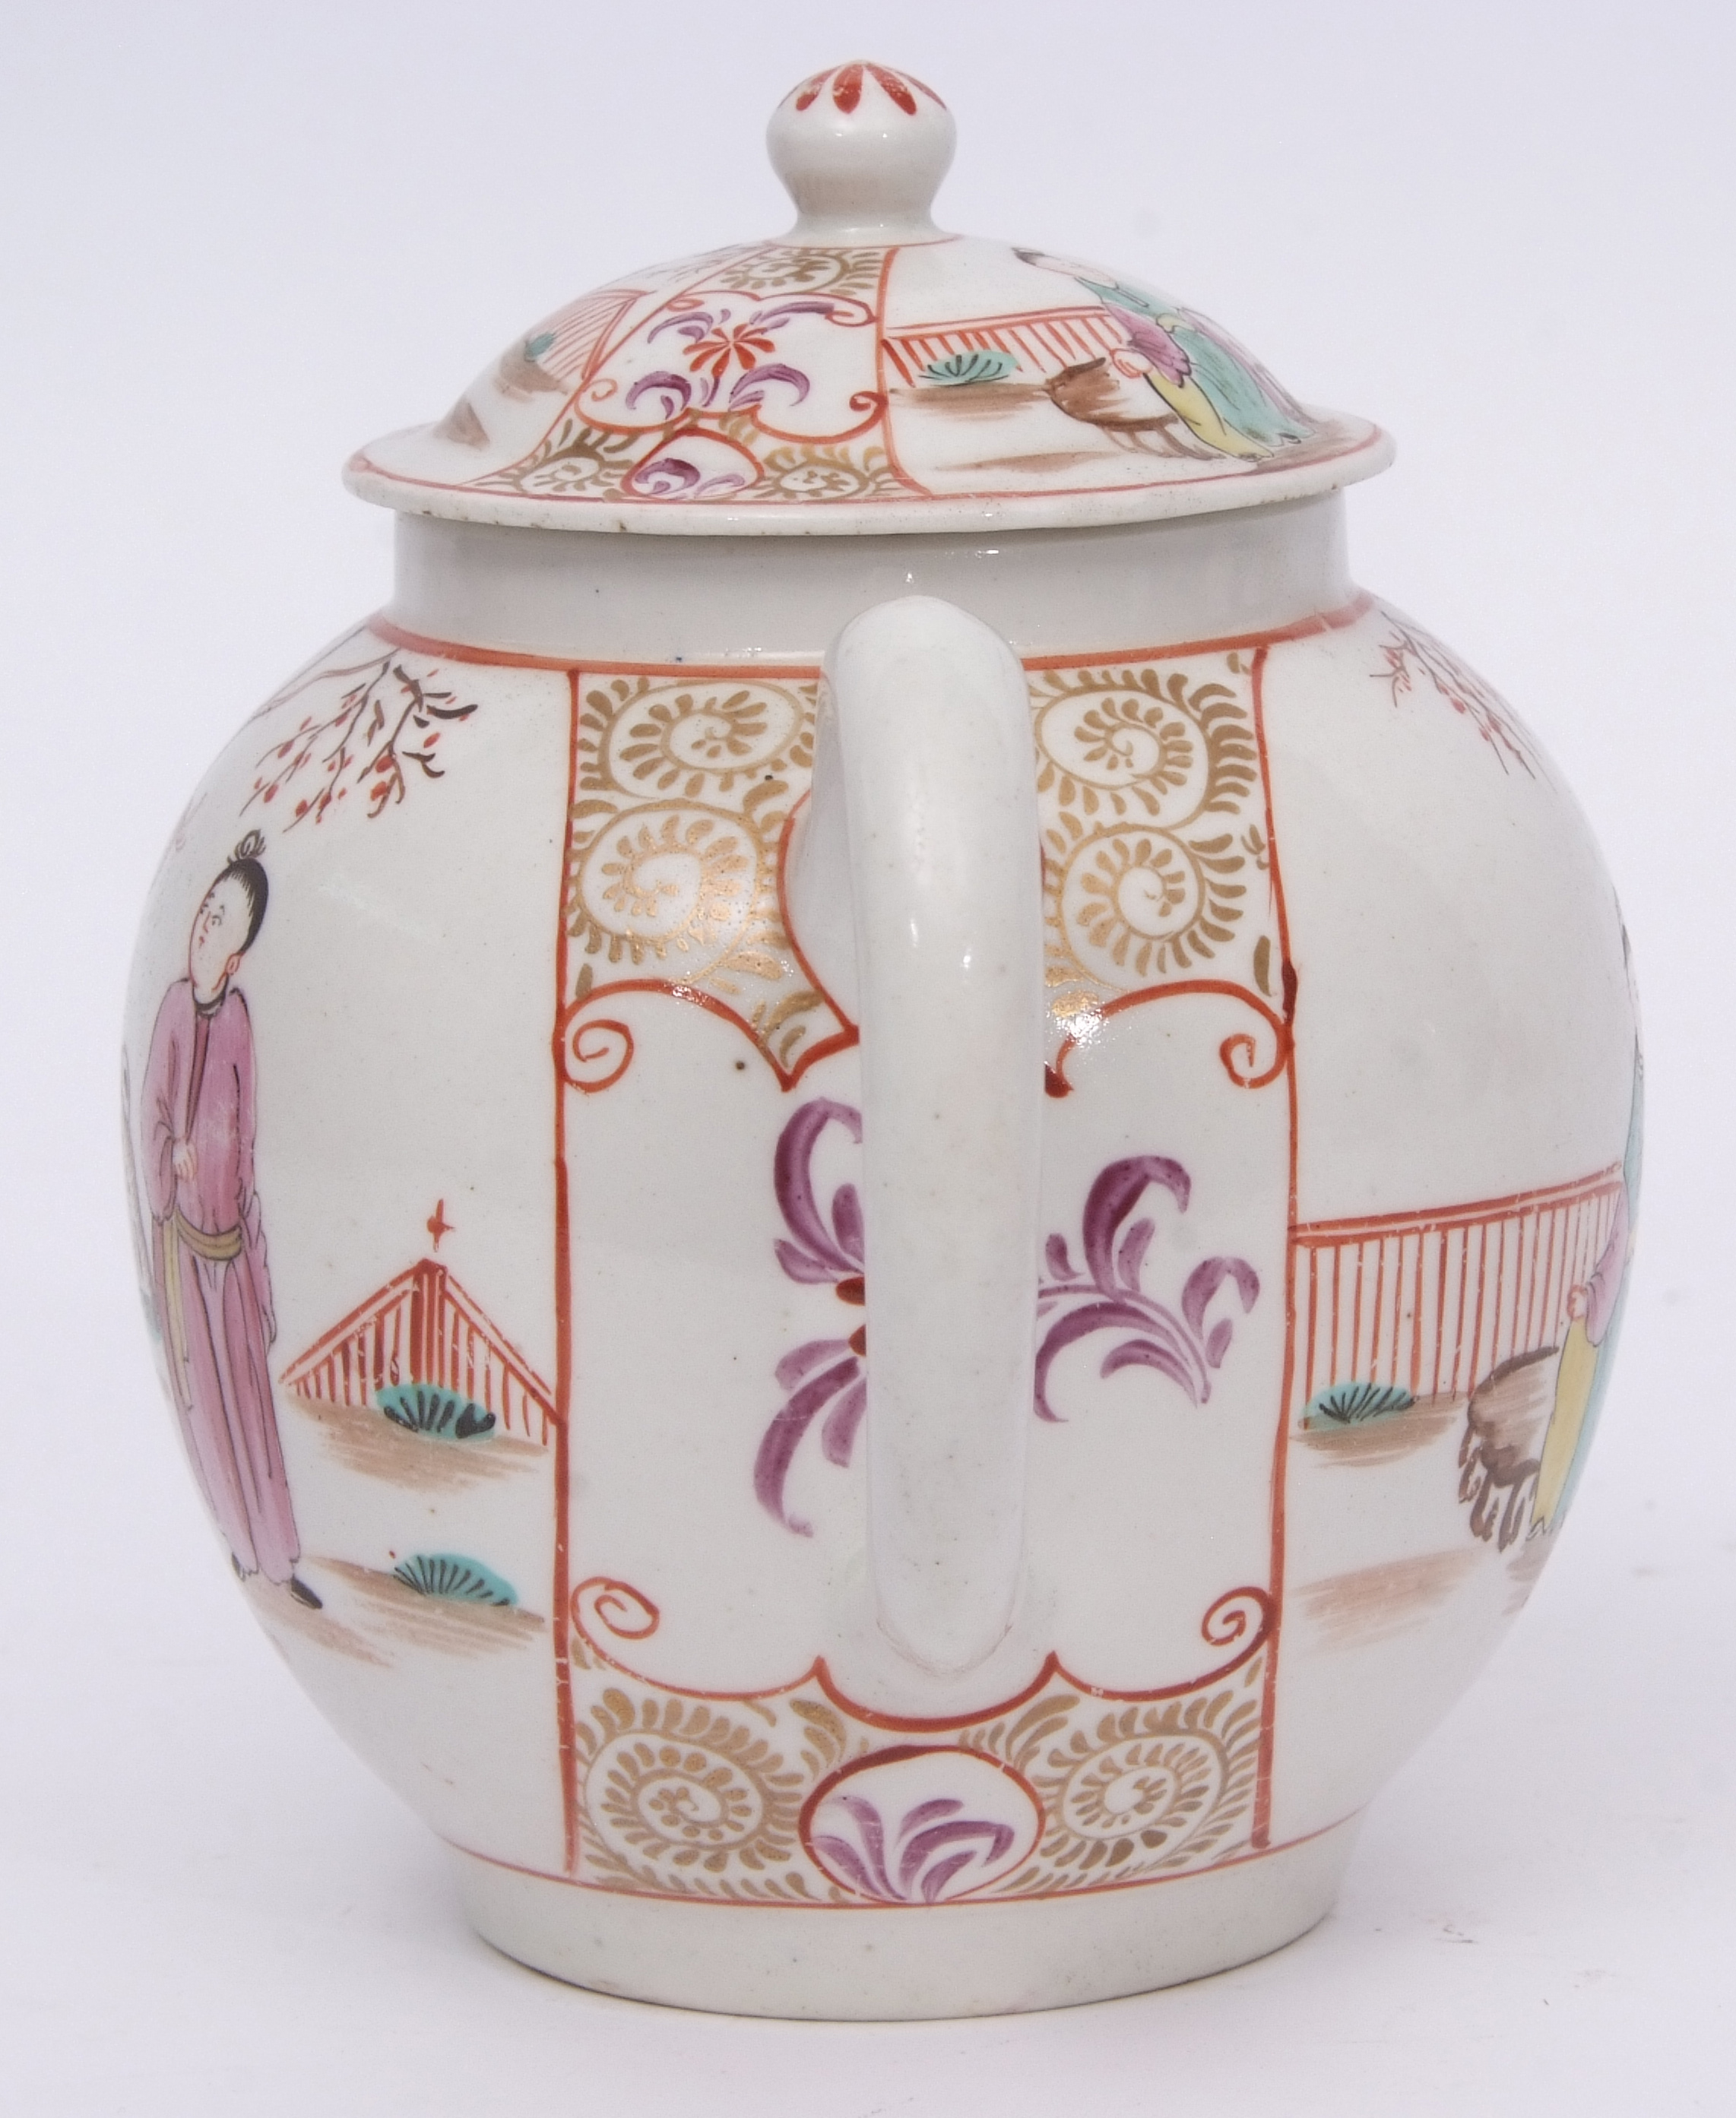 Lowestoft tea pot and cover, circa 1780, decorated in polychrome with chinoiserie scenes within gilt - Image 2 of 7